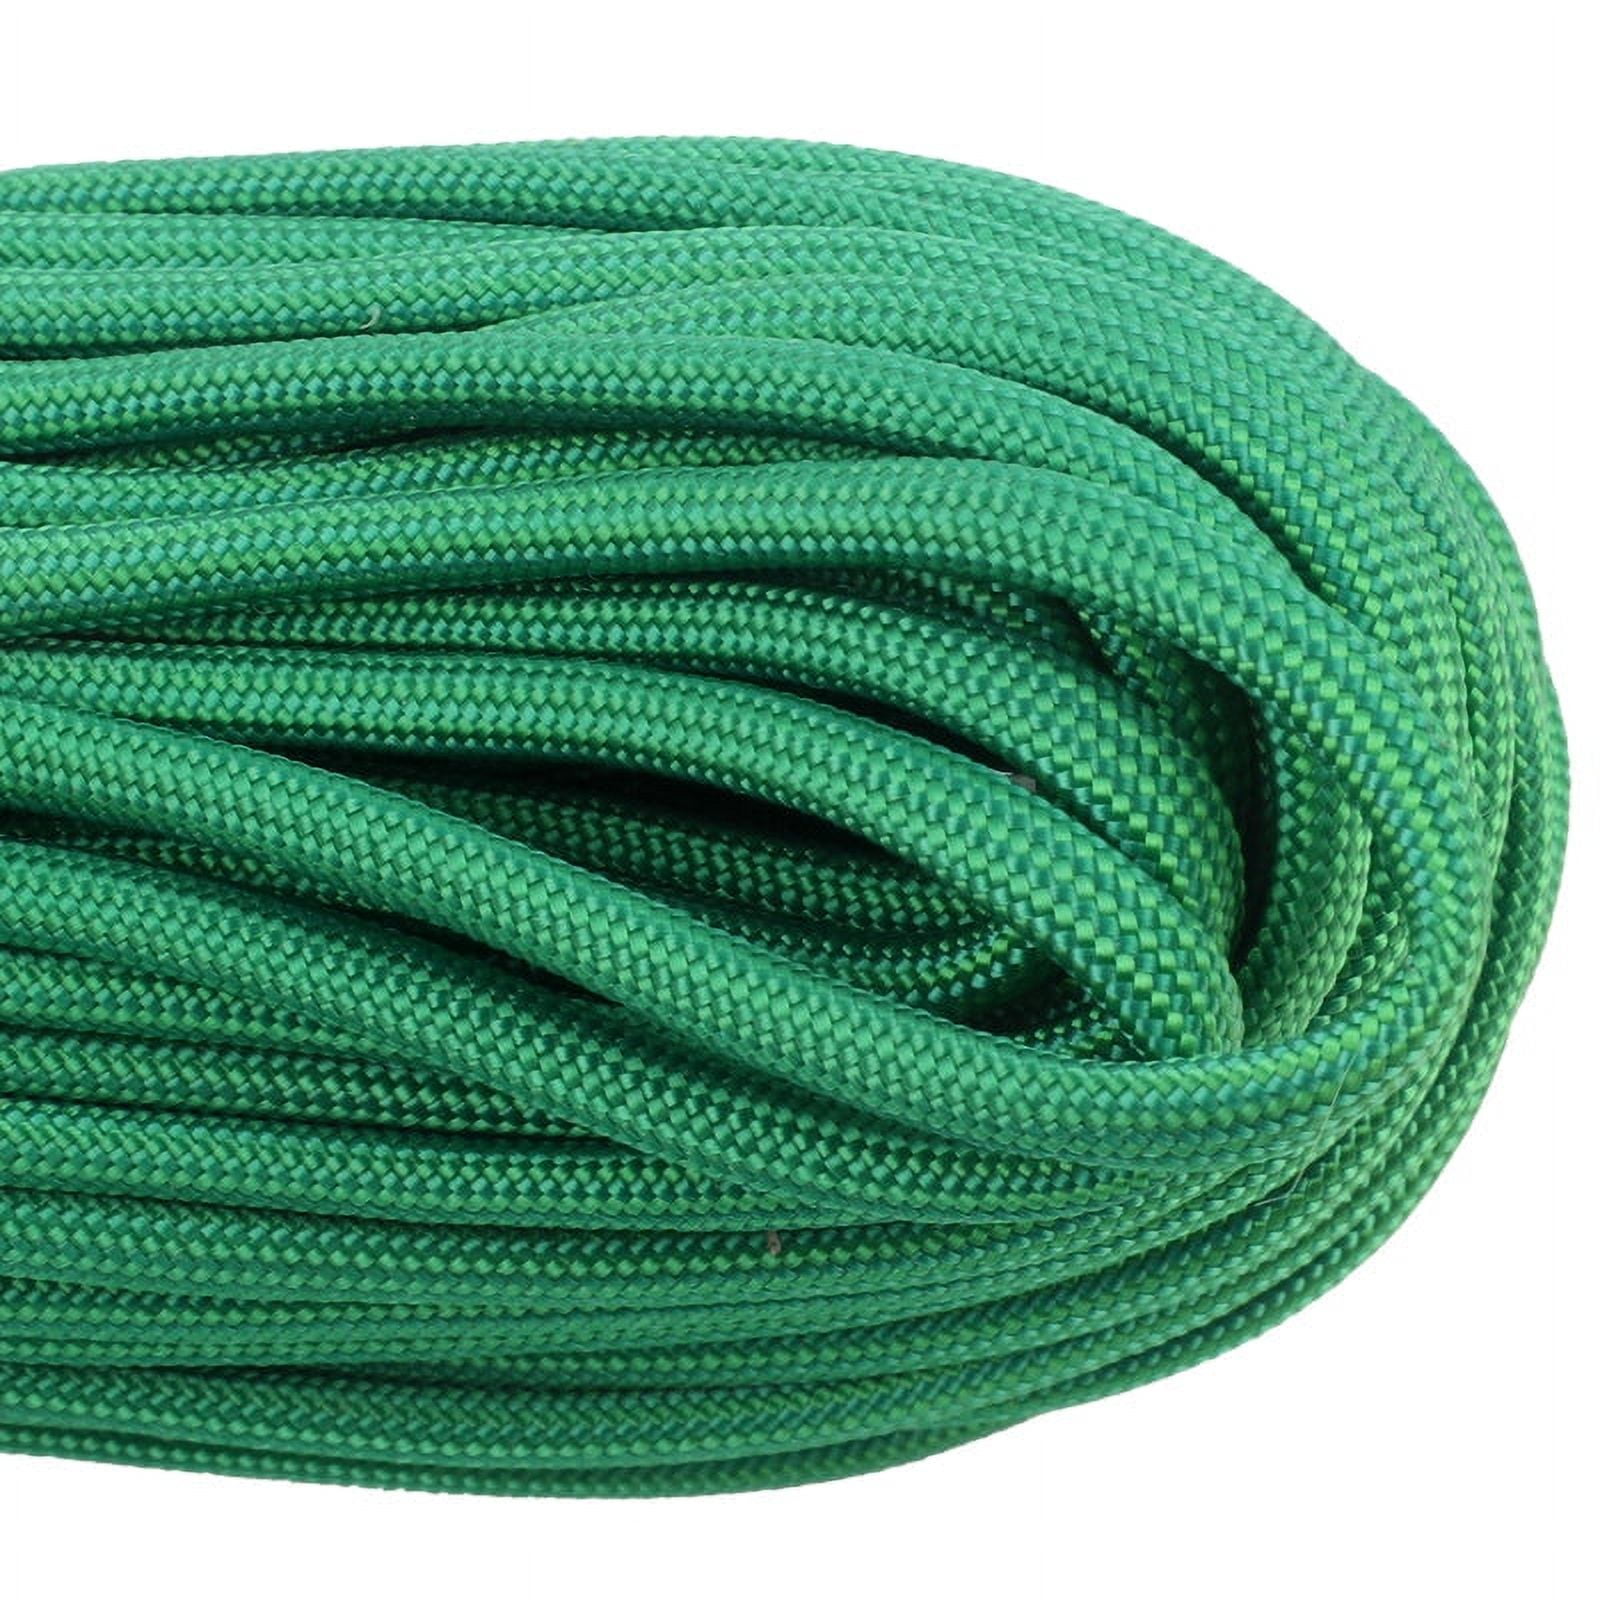 Atwood Rope MFG - 550 Paracord - Green - 300ft 